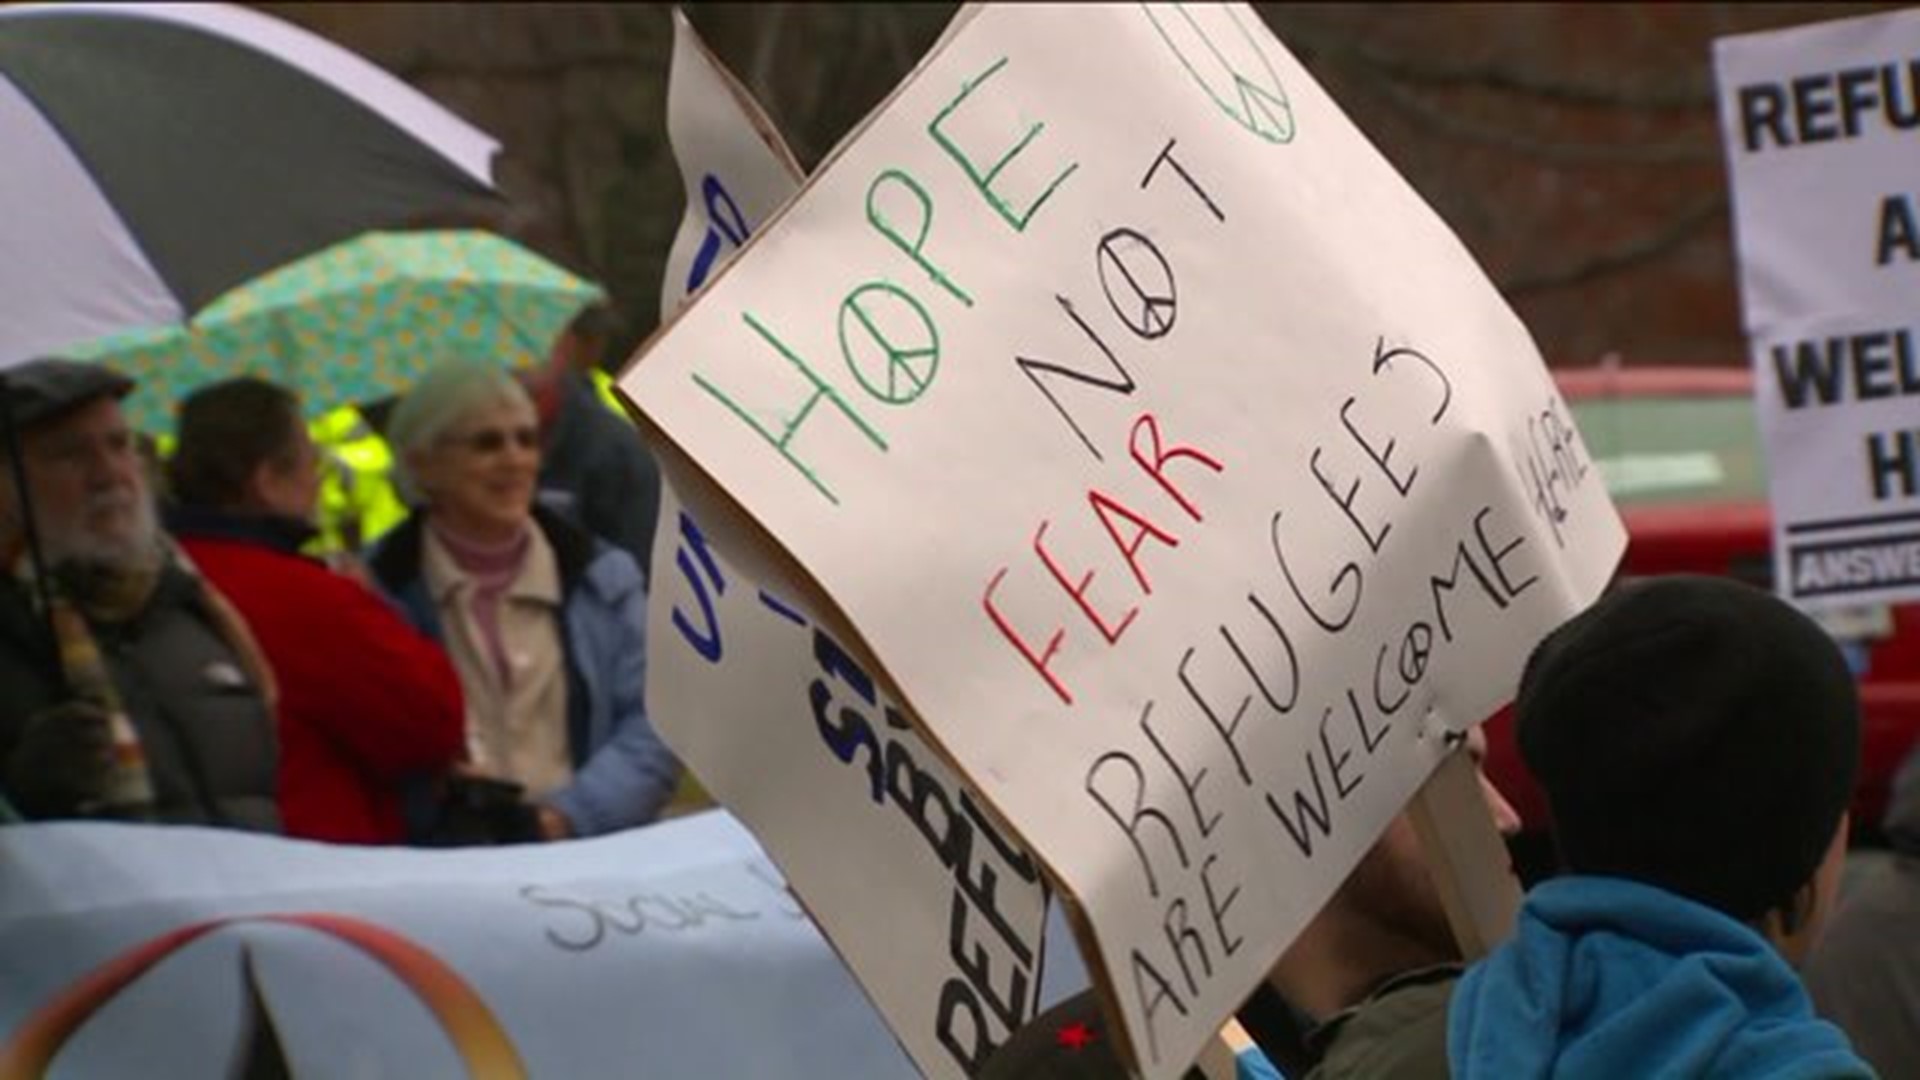 Rallies on Syrian refugees held in Hartford